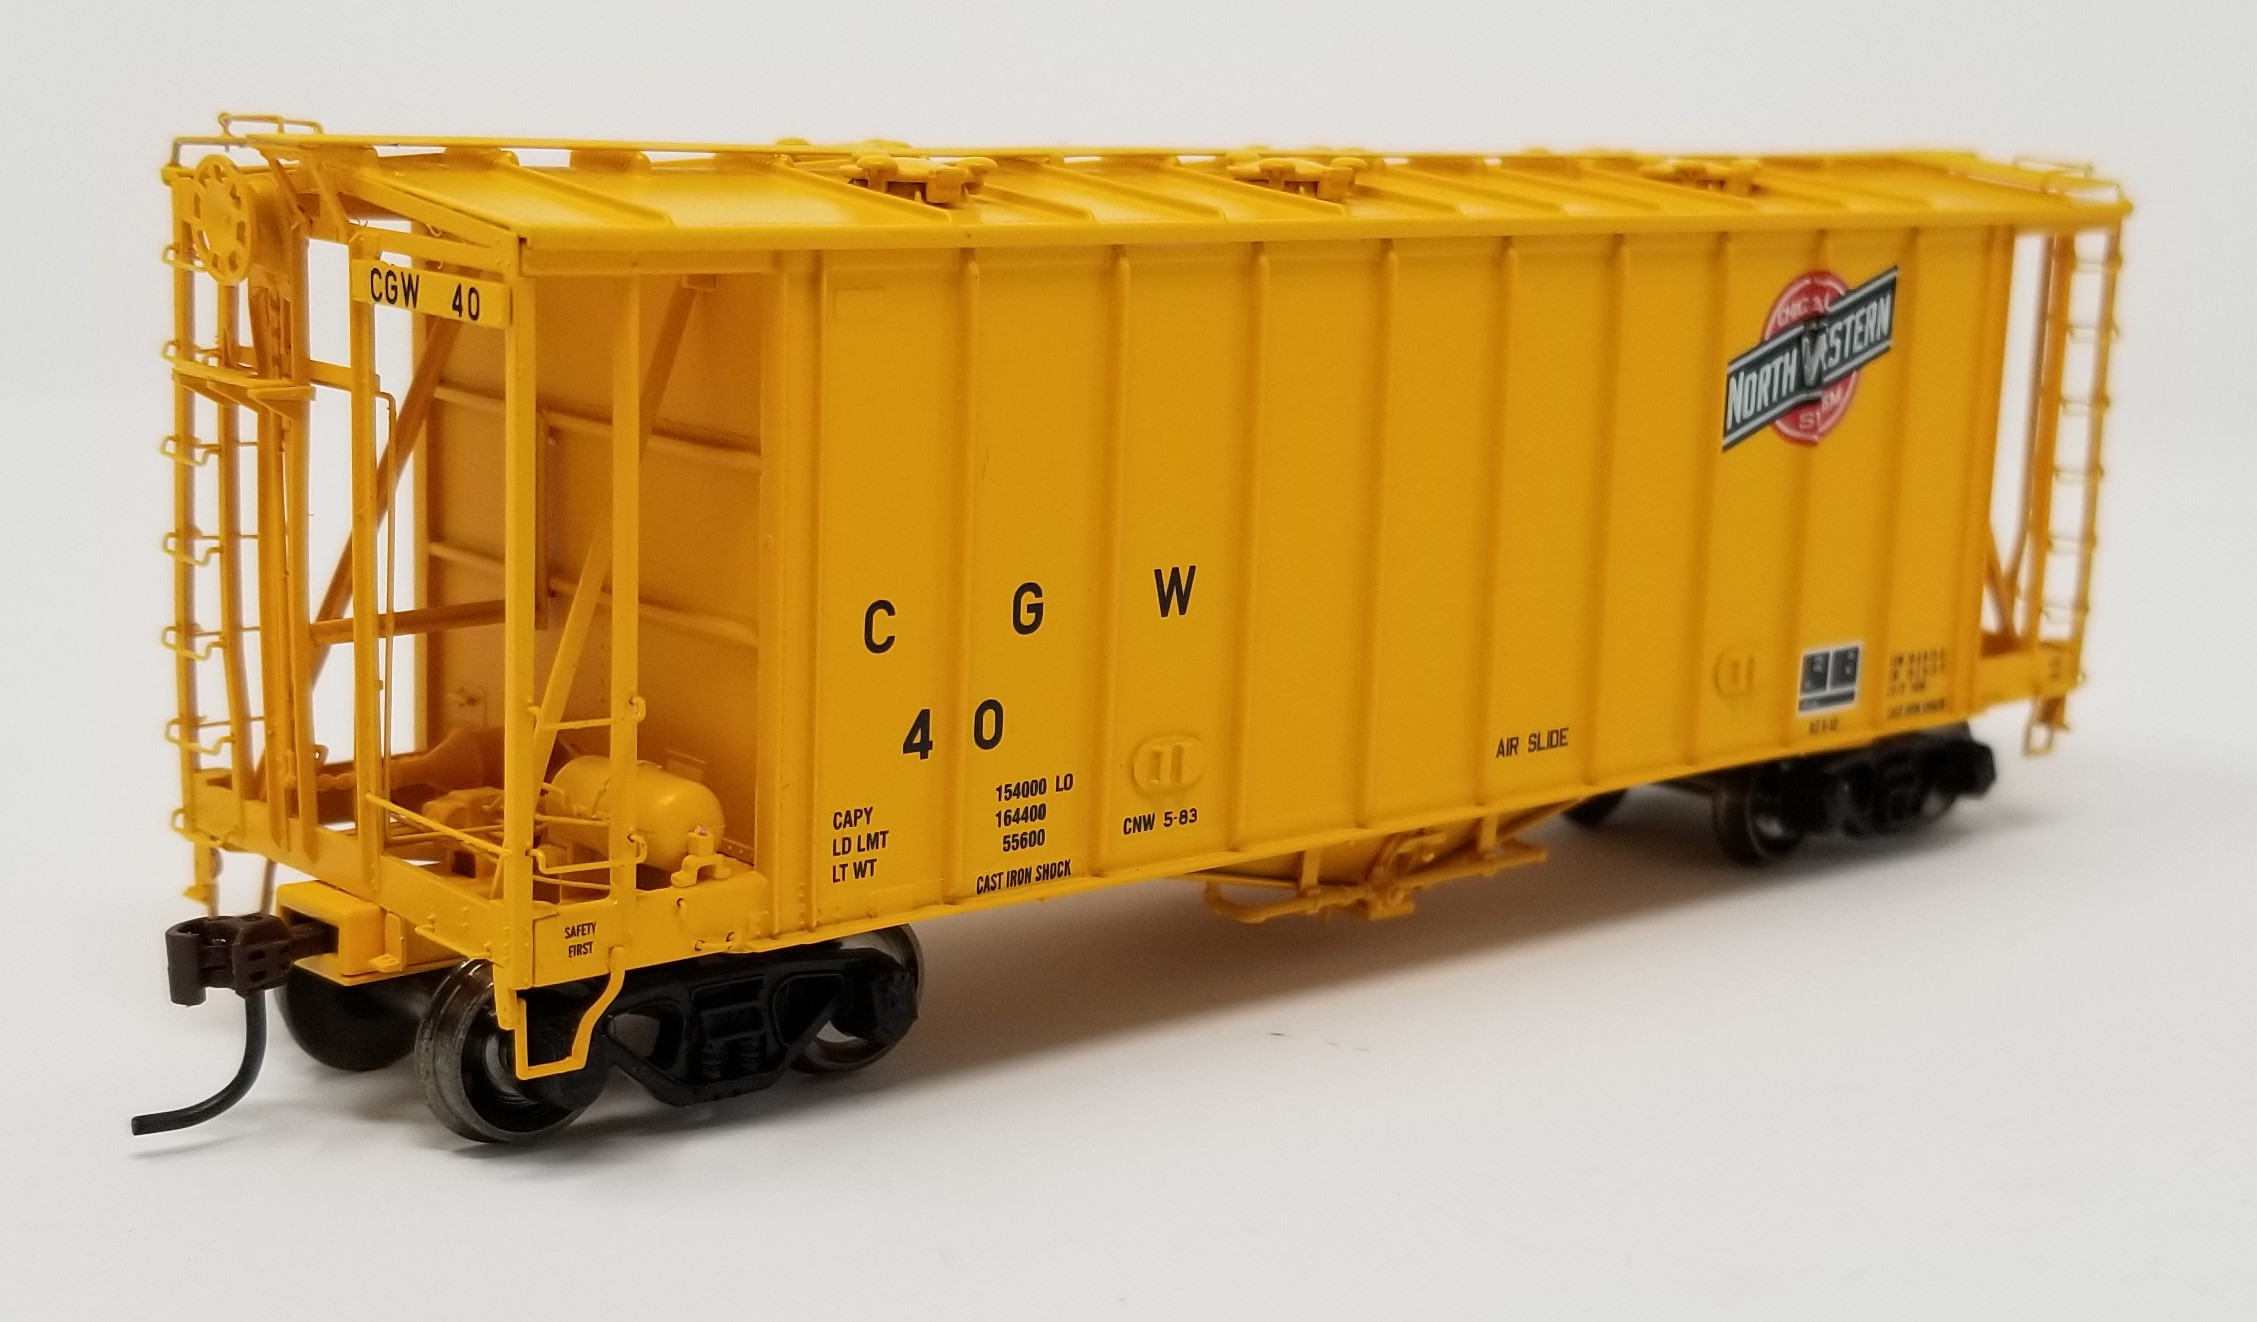 Athearn HO Scale RTR 40' 2600 Airslide Early Version, CGW #40 (Yellow) Lombard Hobbies Exclusive